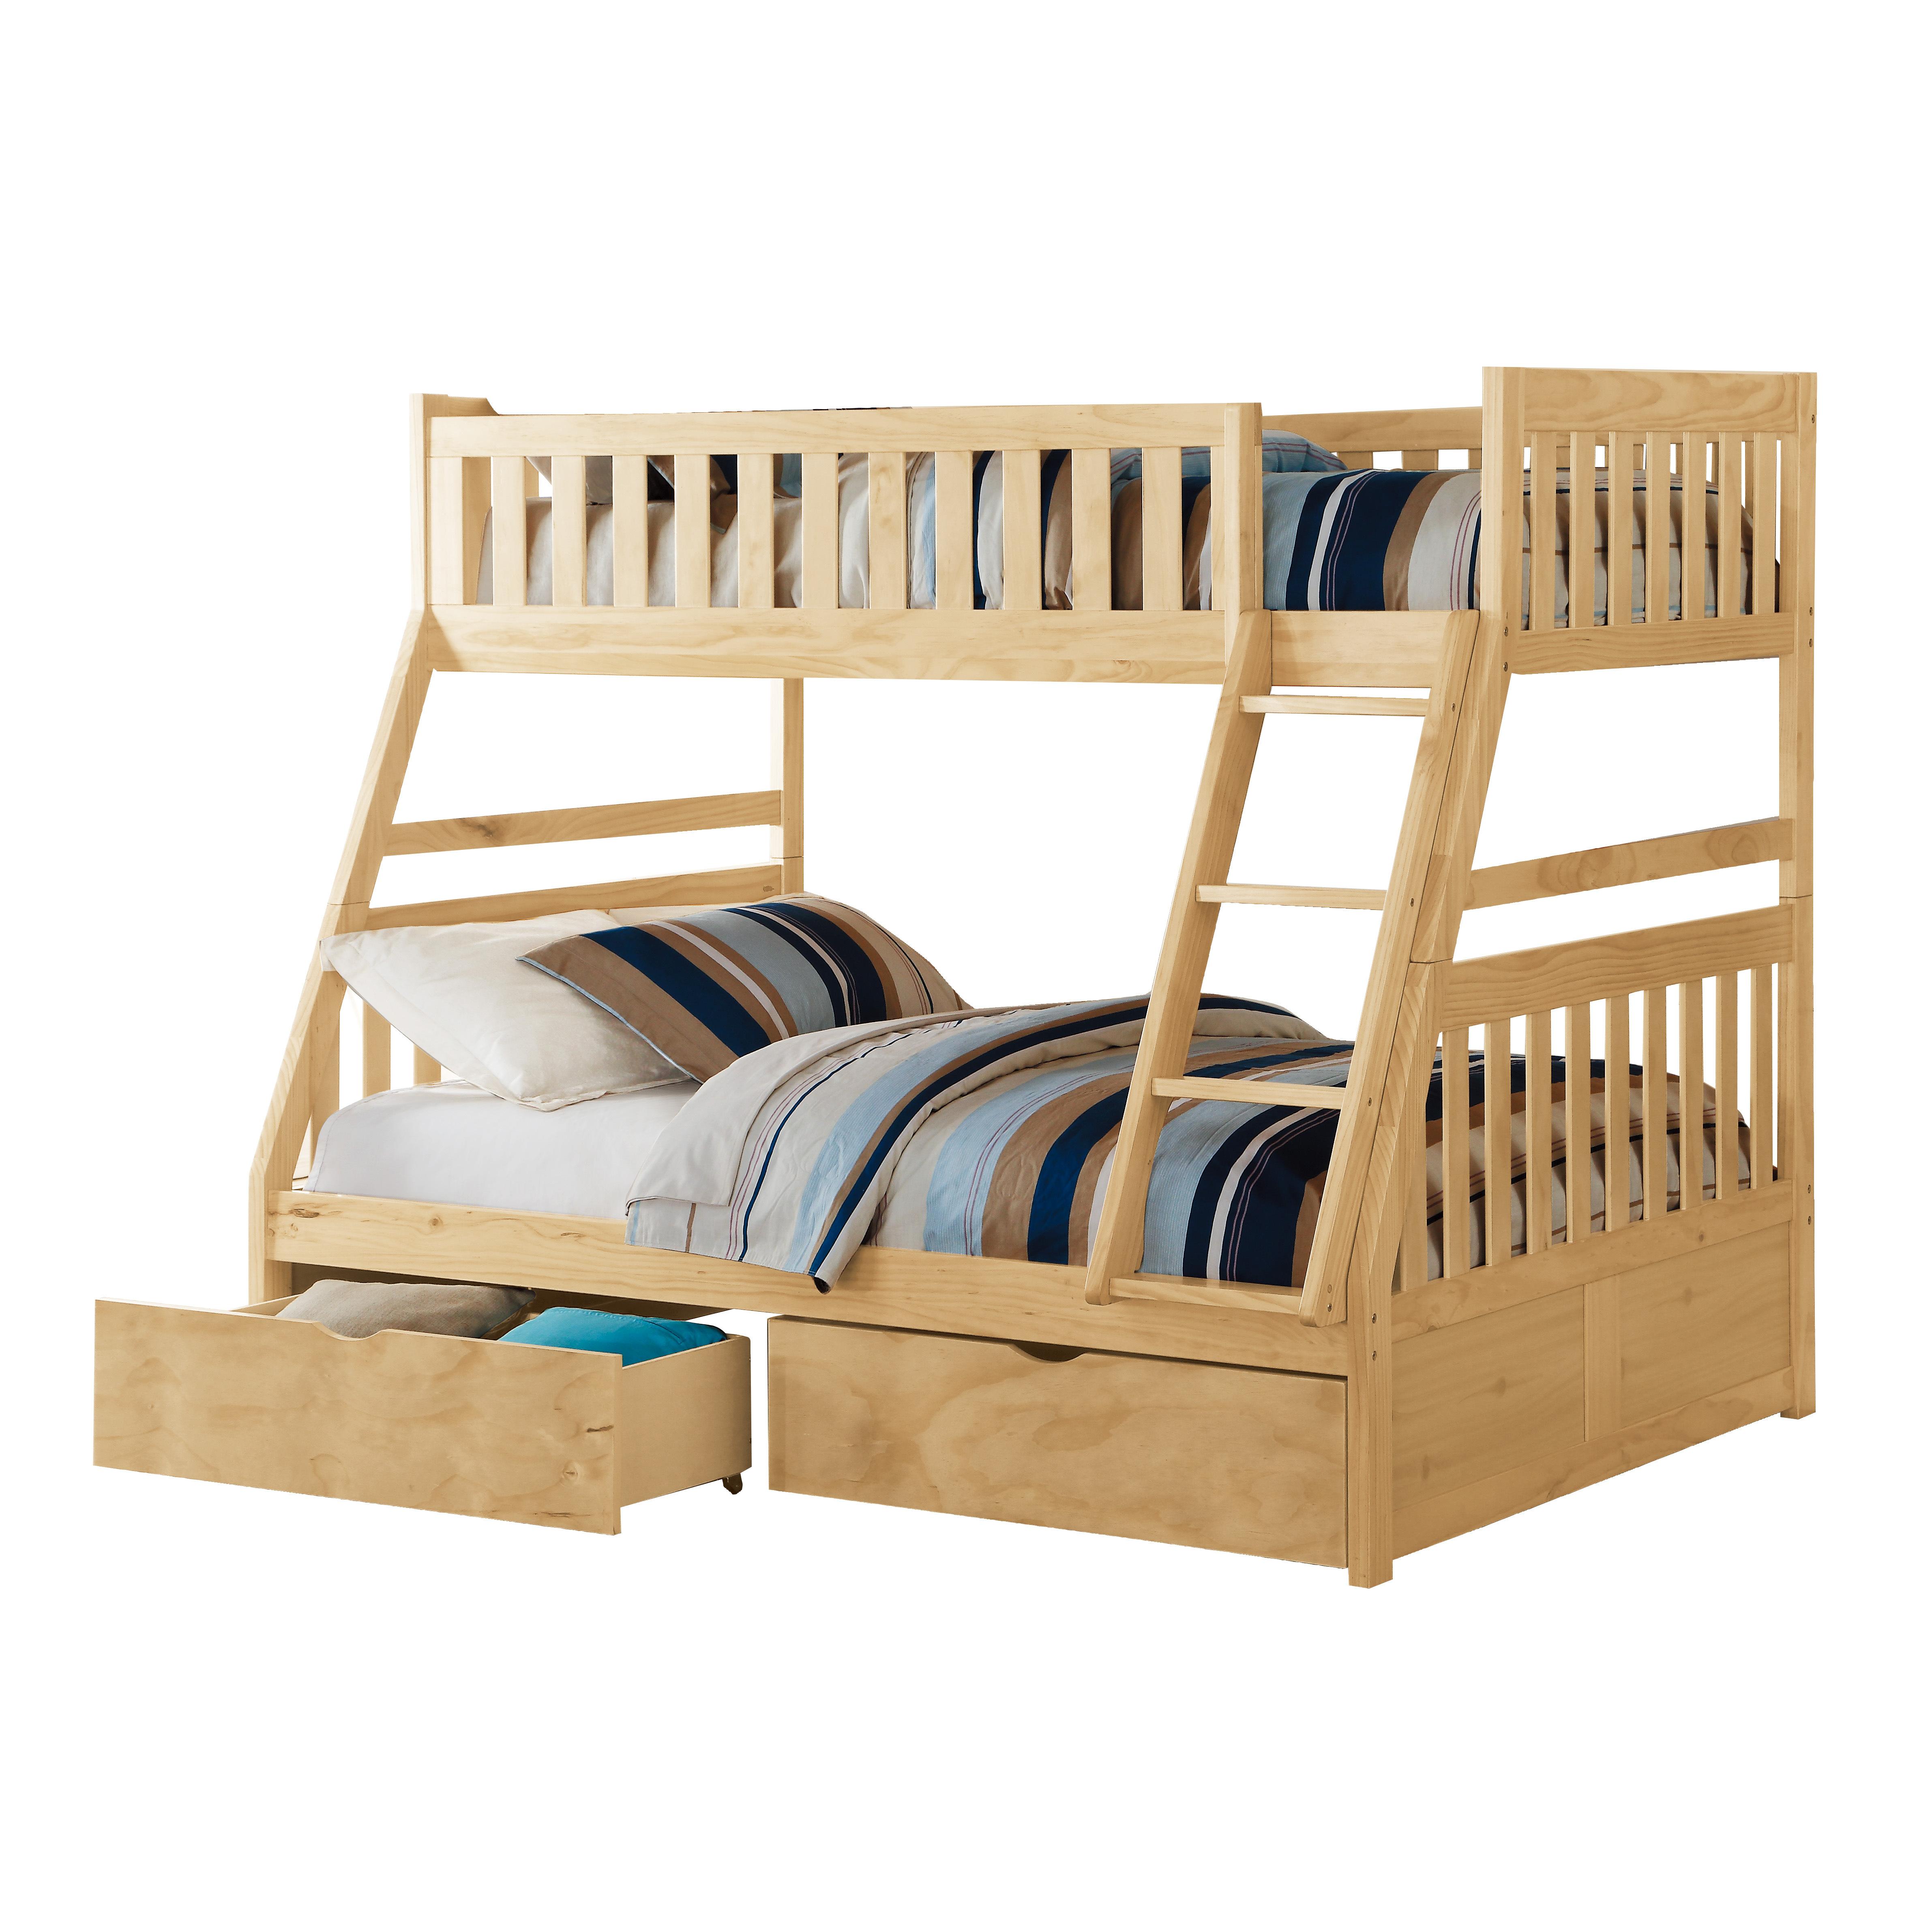 Transitional Twin/Full Bunk Bed B2043TF-1*T Bartly B2043TF-1*T in Natural 